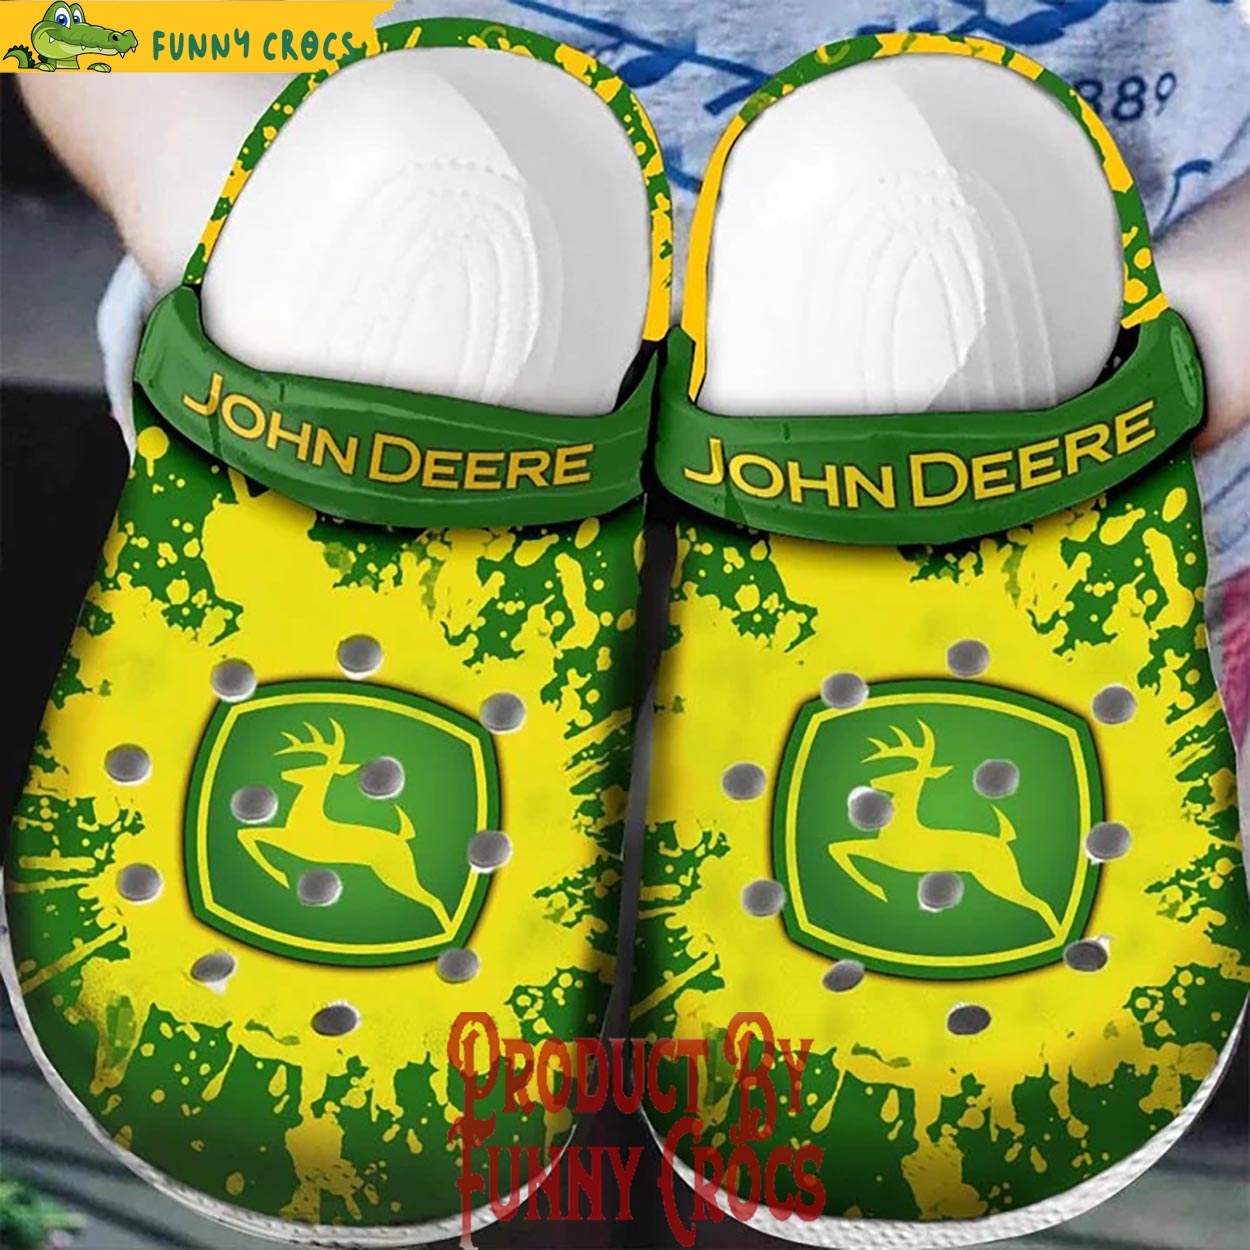 John Deere Gator Crocs Shoes - Discover Comfort And Style Clog Shoes ...